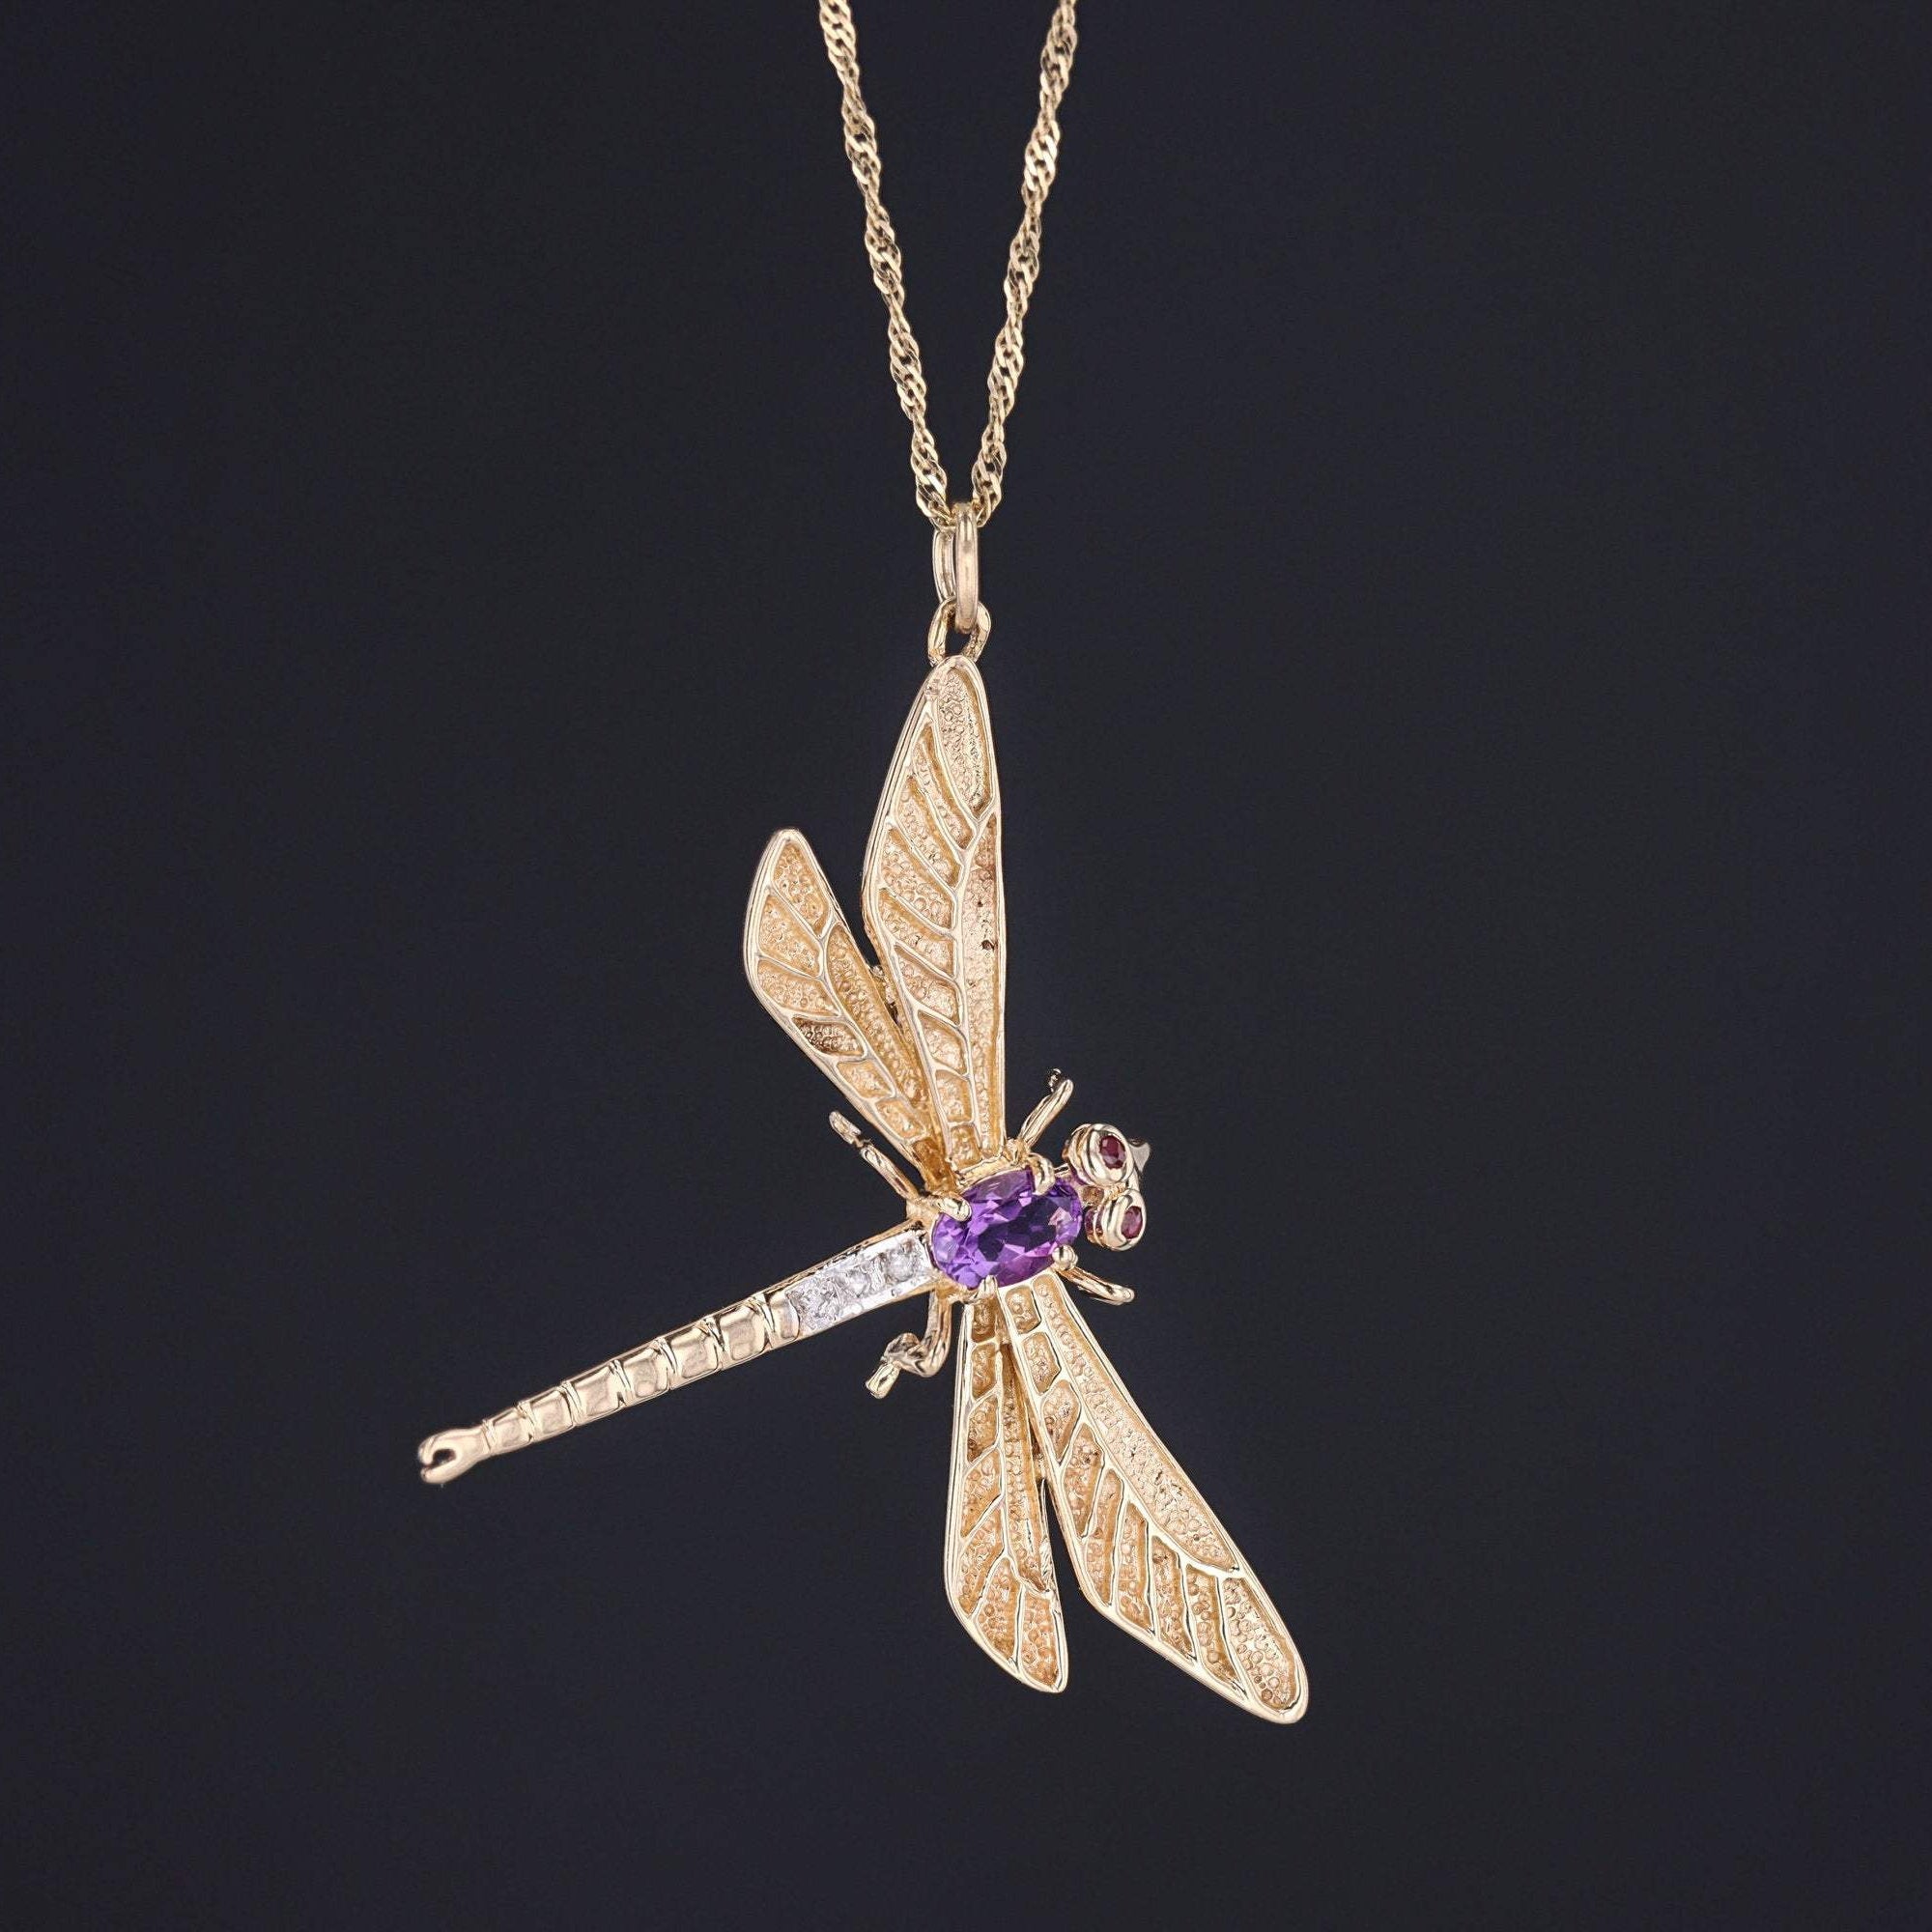 Vintage Dragonfly Pendant | 14k Gold Amethyst, Ruby & Diamond Dragonfly on Optional 14k Chain | Dragonfly Necklace